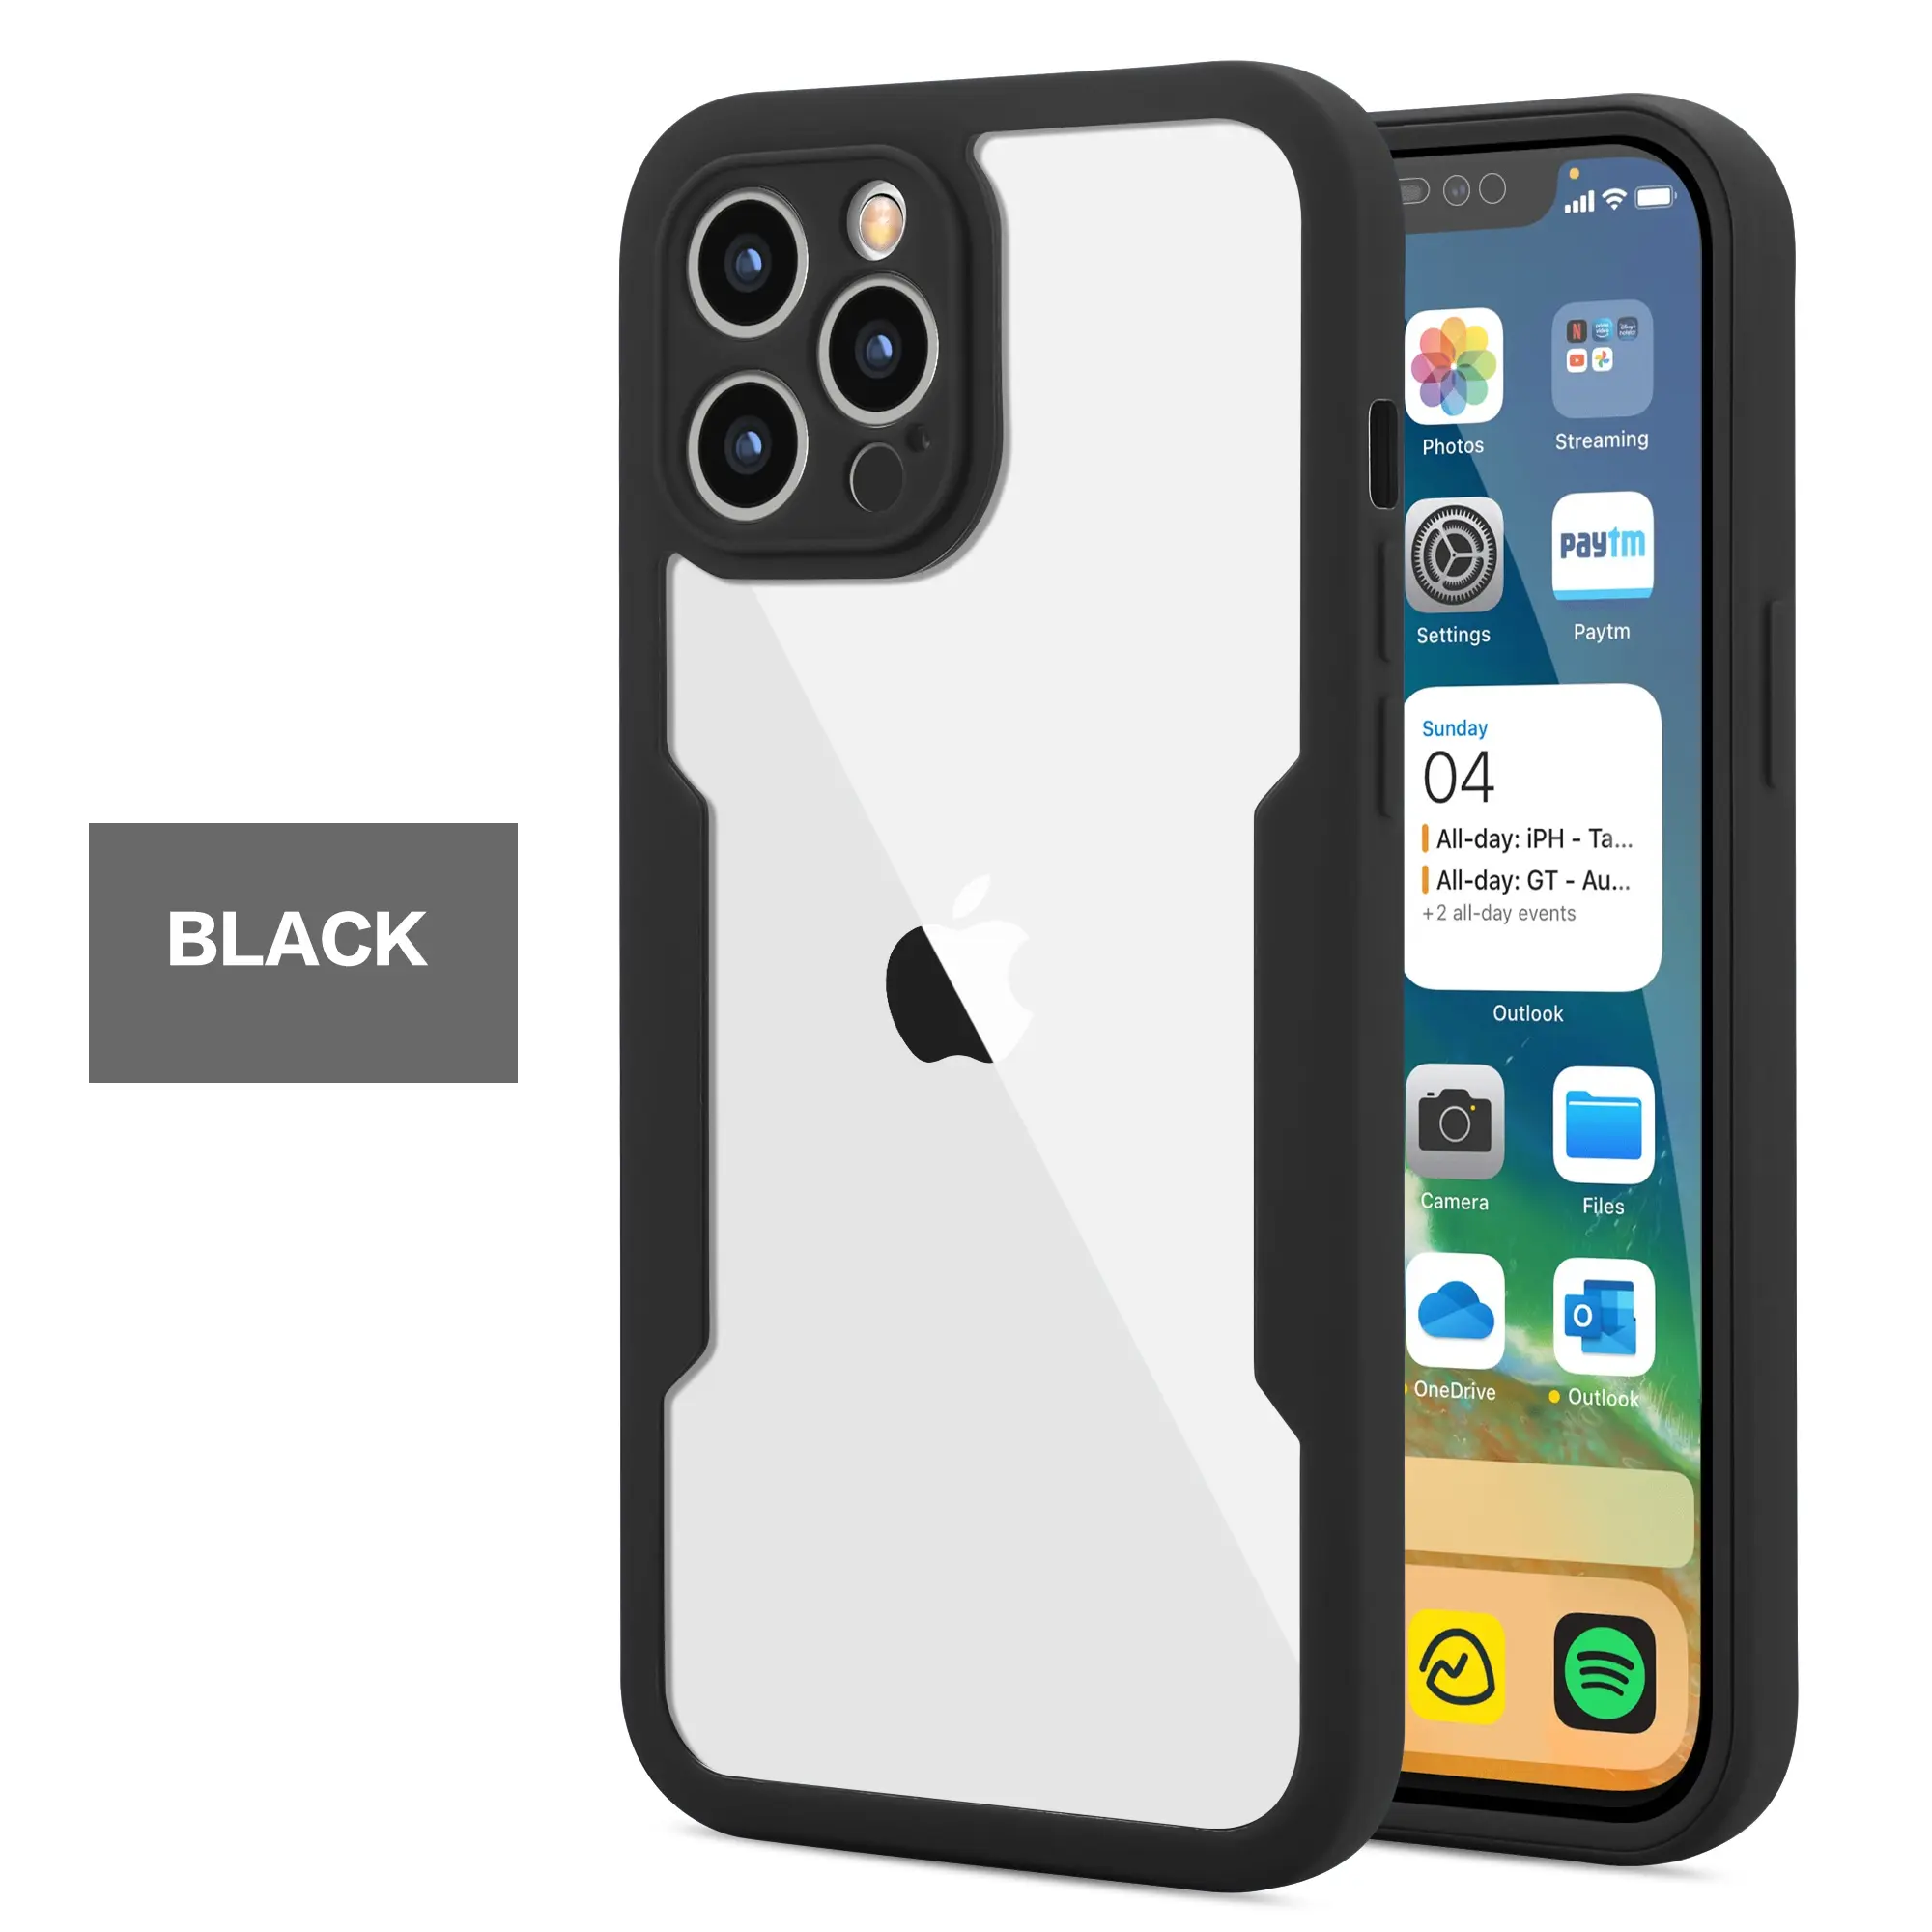 2 In 1 360 Full Cover Case Soft Tpu Acrylic Mobile Phone Clear Phone Cover For Iphone X Xs Xr 11 12 13 Mini Pro